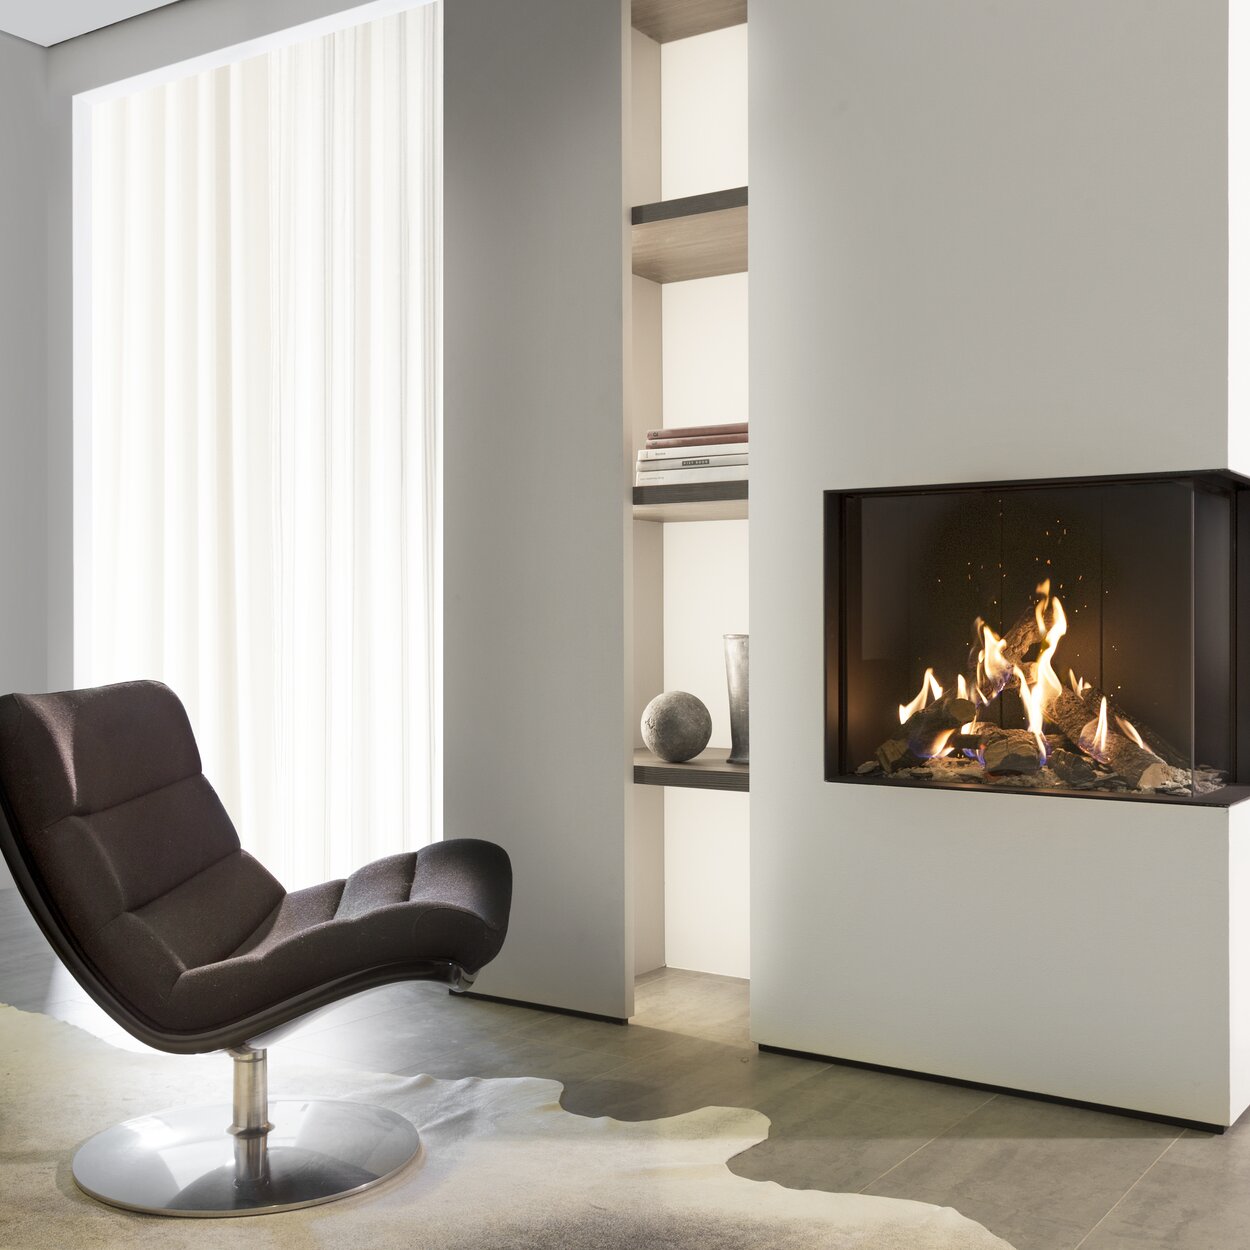 Corner variant gas fireplace GP65/55C with white panelling in a simple and bright living room with armchair